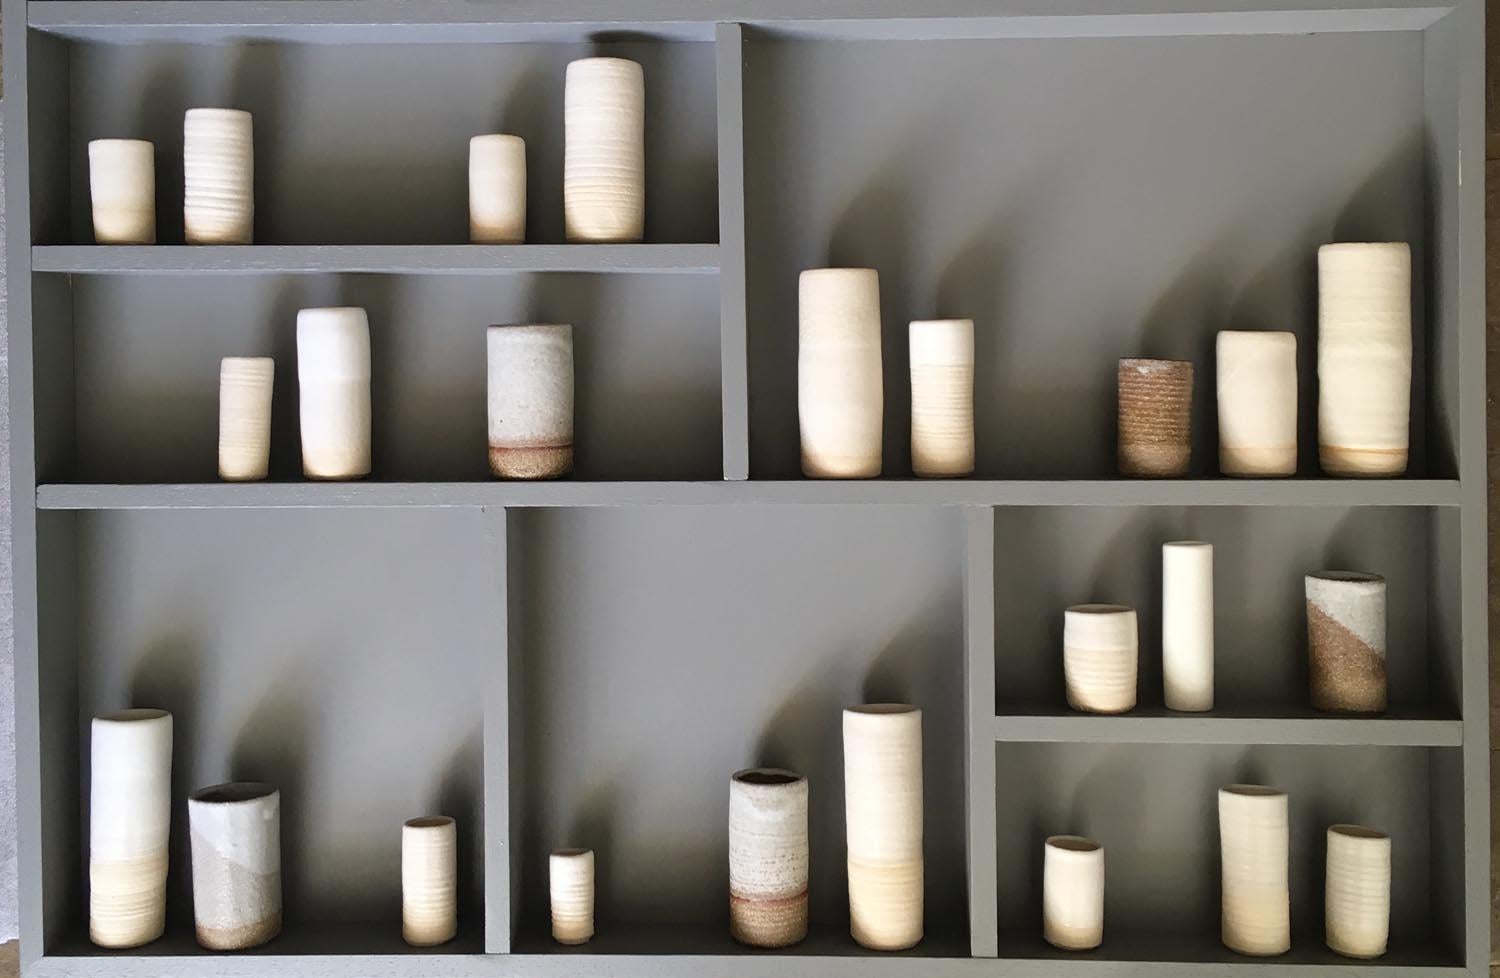 Emma Bell’s ceramic and porcelain Pot Frame – Installation Piece.
Emma Bell says: “This piece is inspired by my glaze test vessels. As a potter, I am always staggered by how different the same/similar glaze turns out on different clay bodies when it